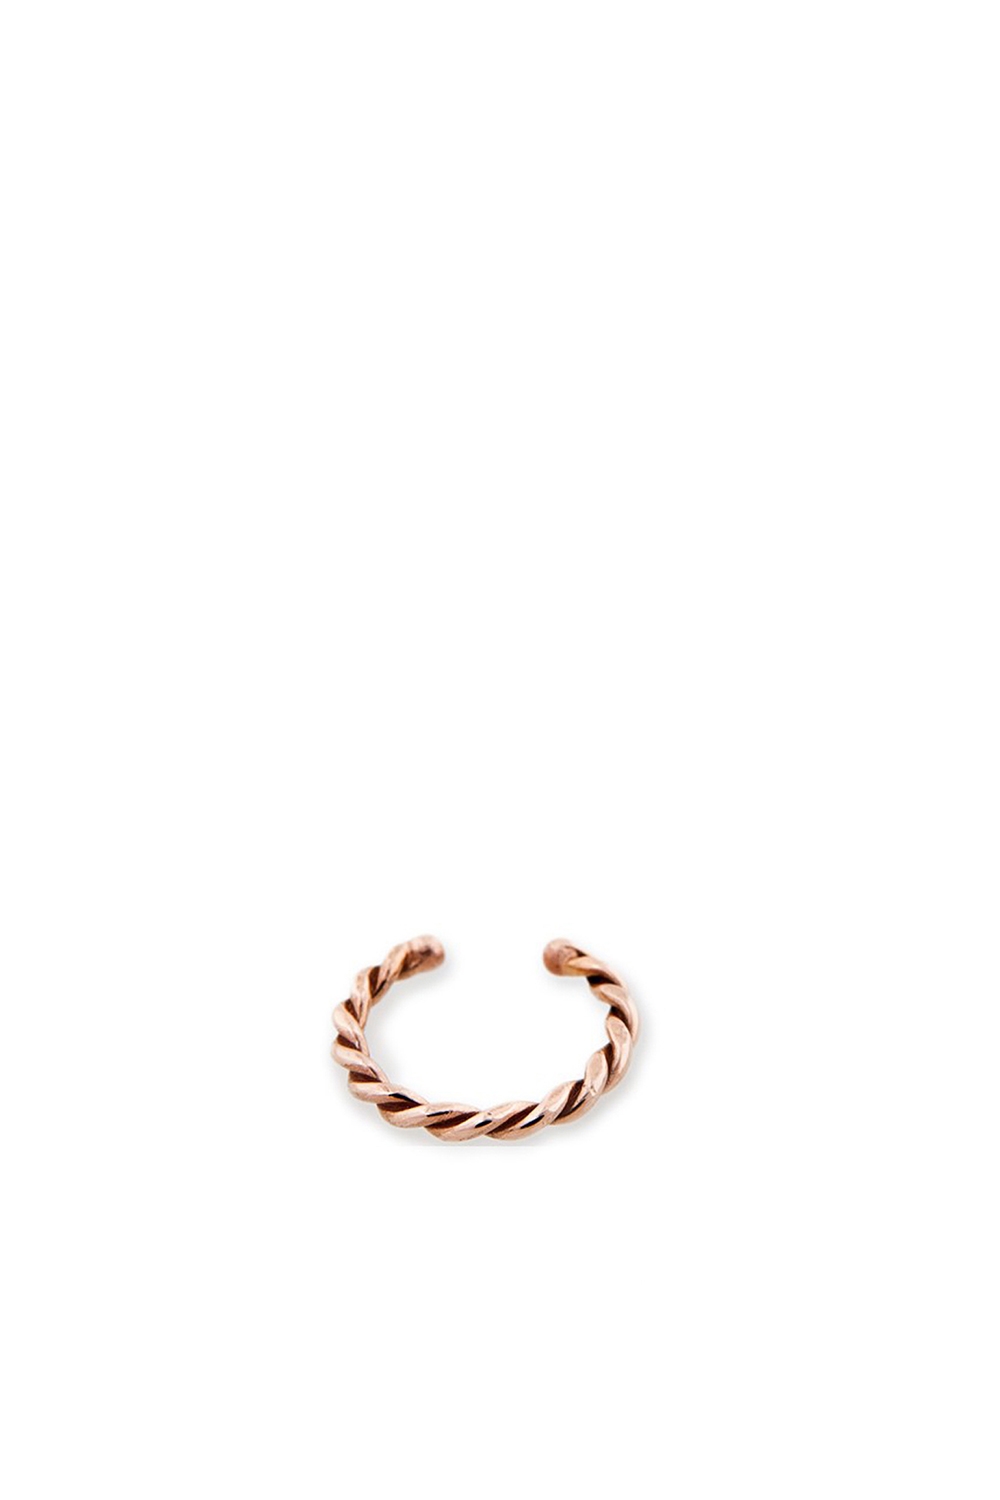 ROSE GOLD TWISTED JEWELRY